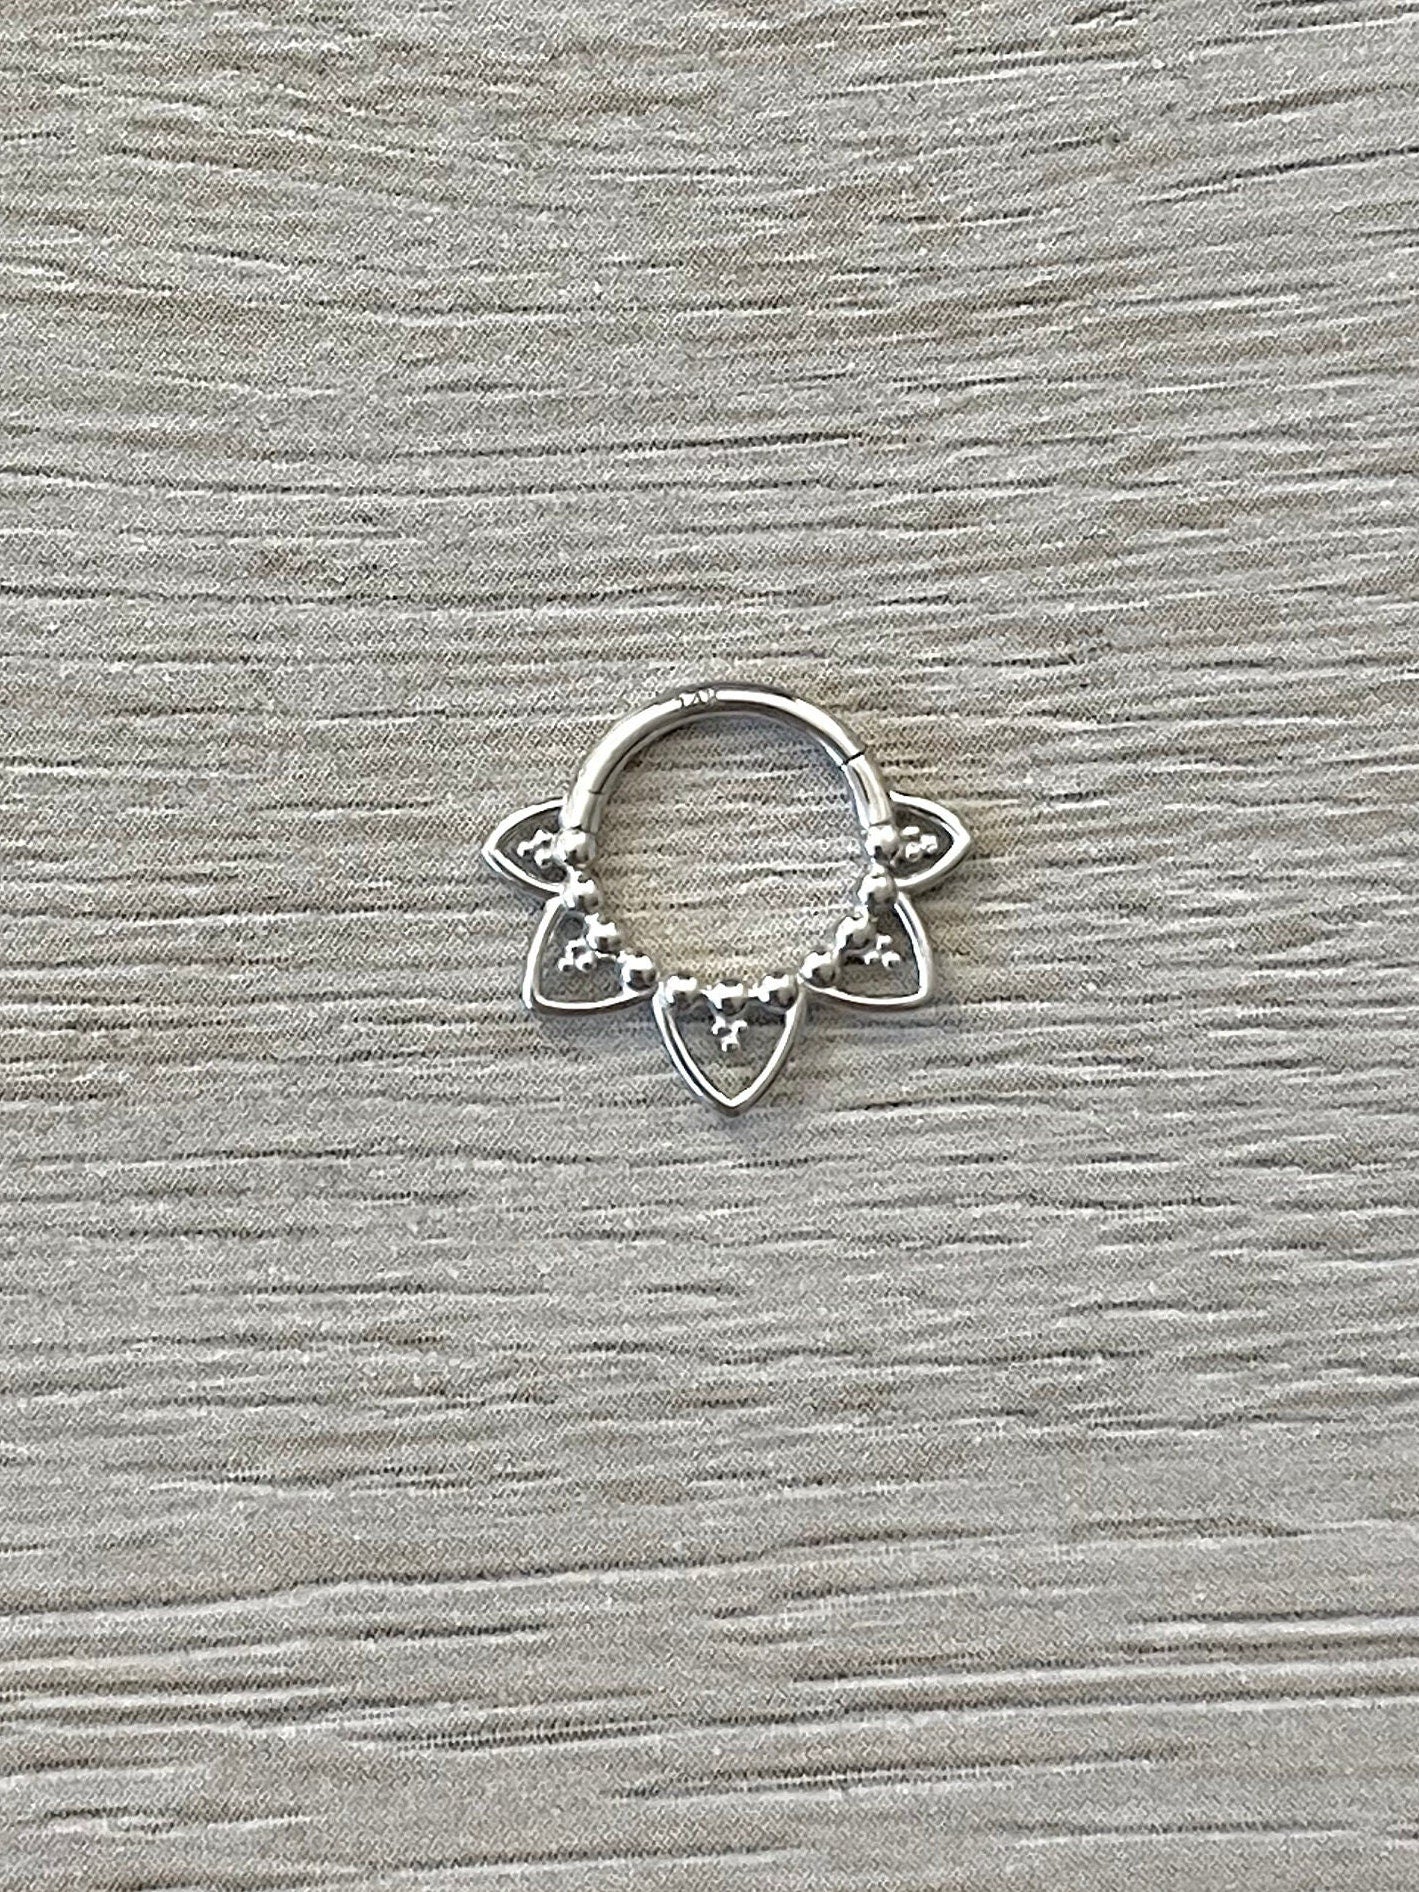 Solid Gold Septum Piercing Jewelry (16G, 8mm, 14k Solid Yellow or White Gold)